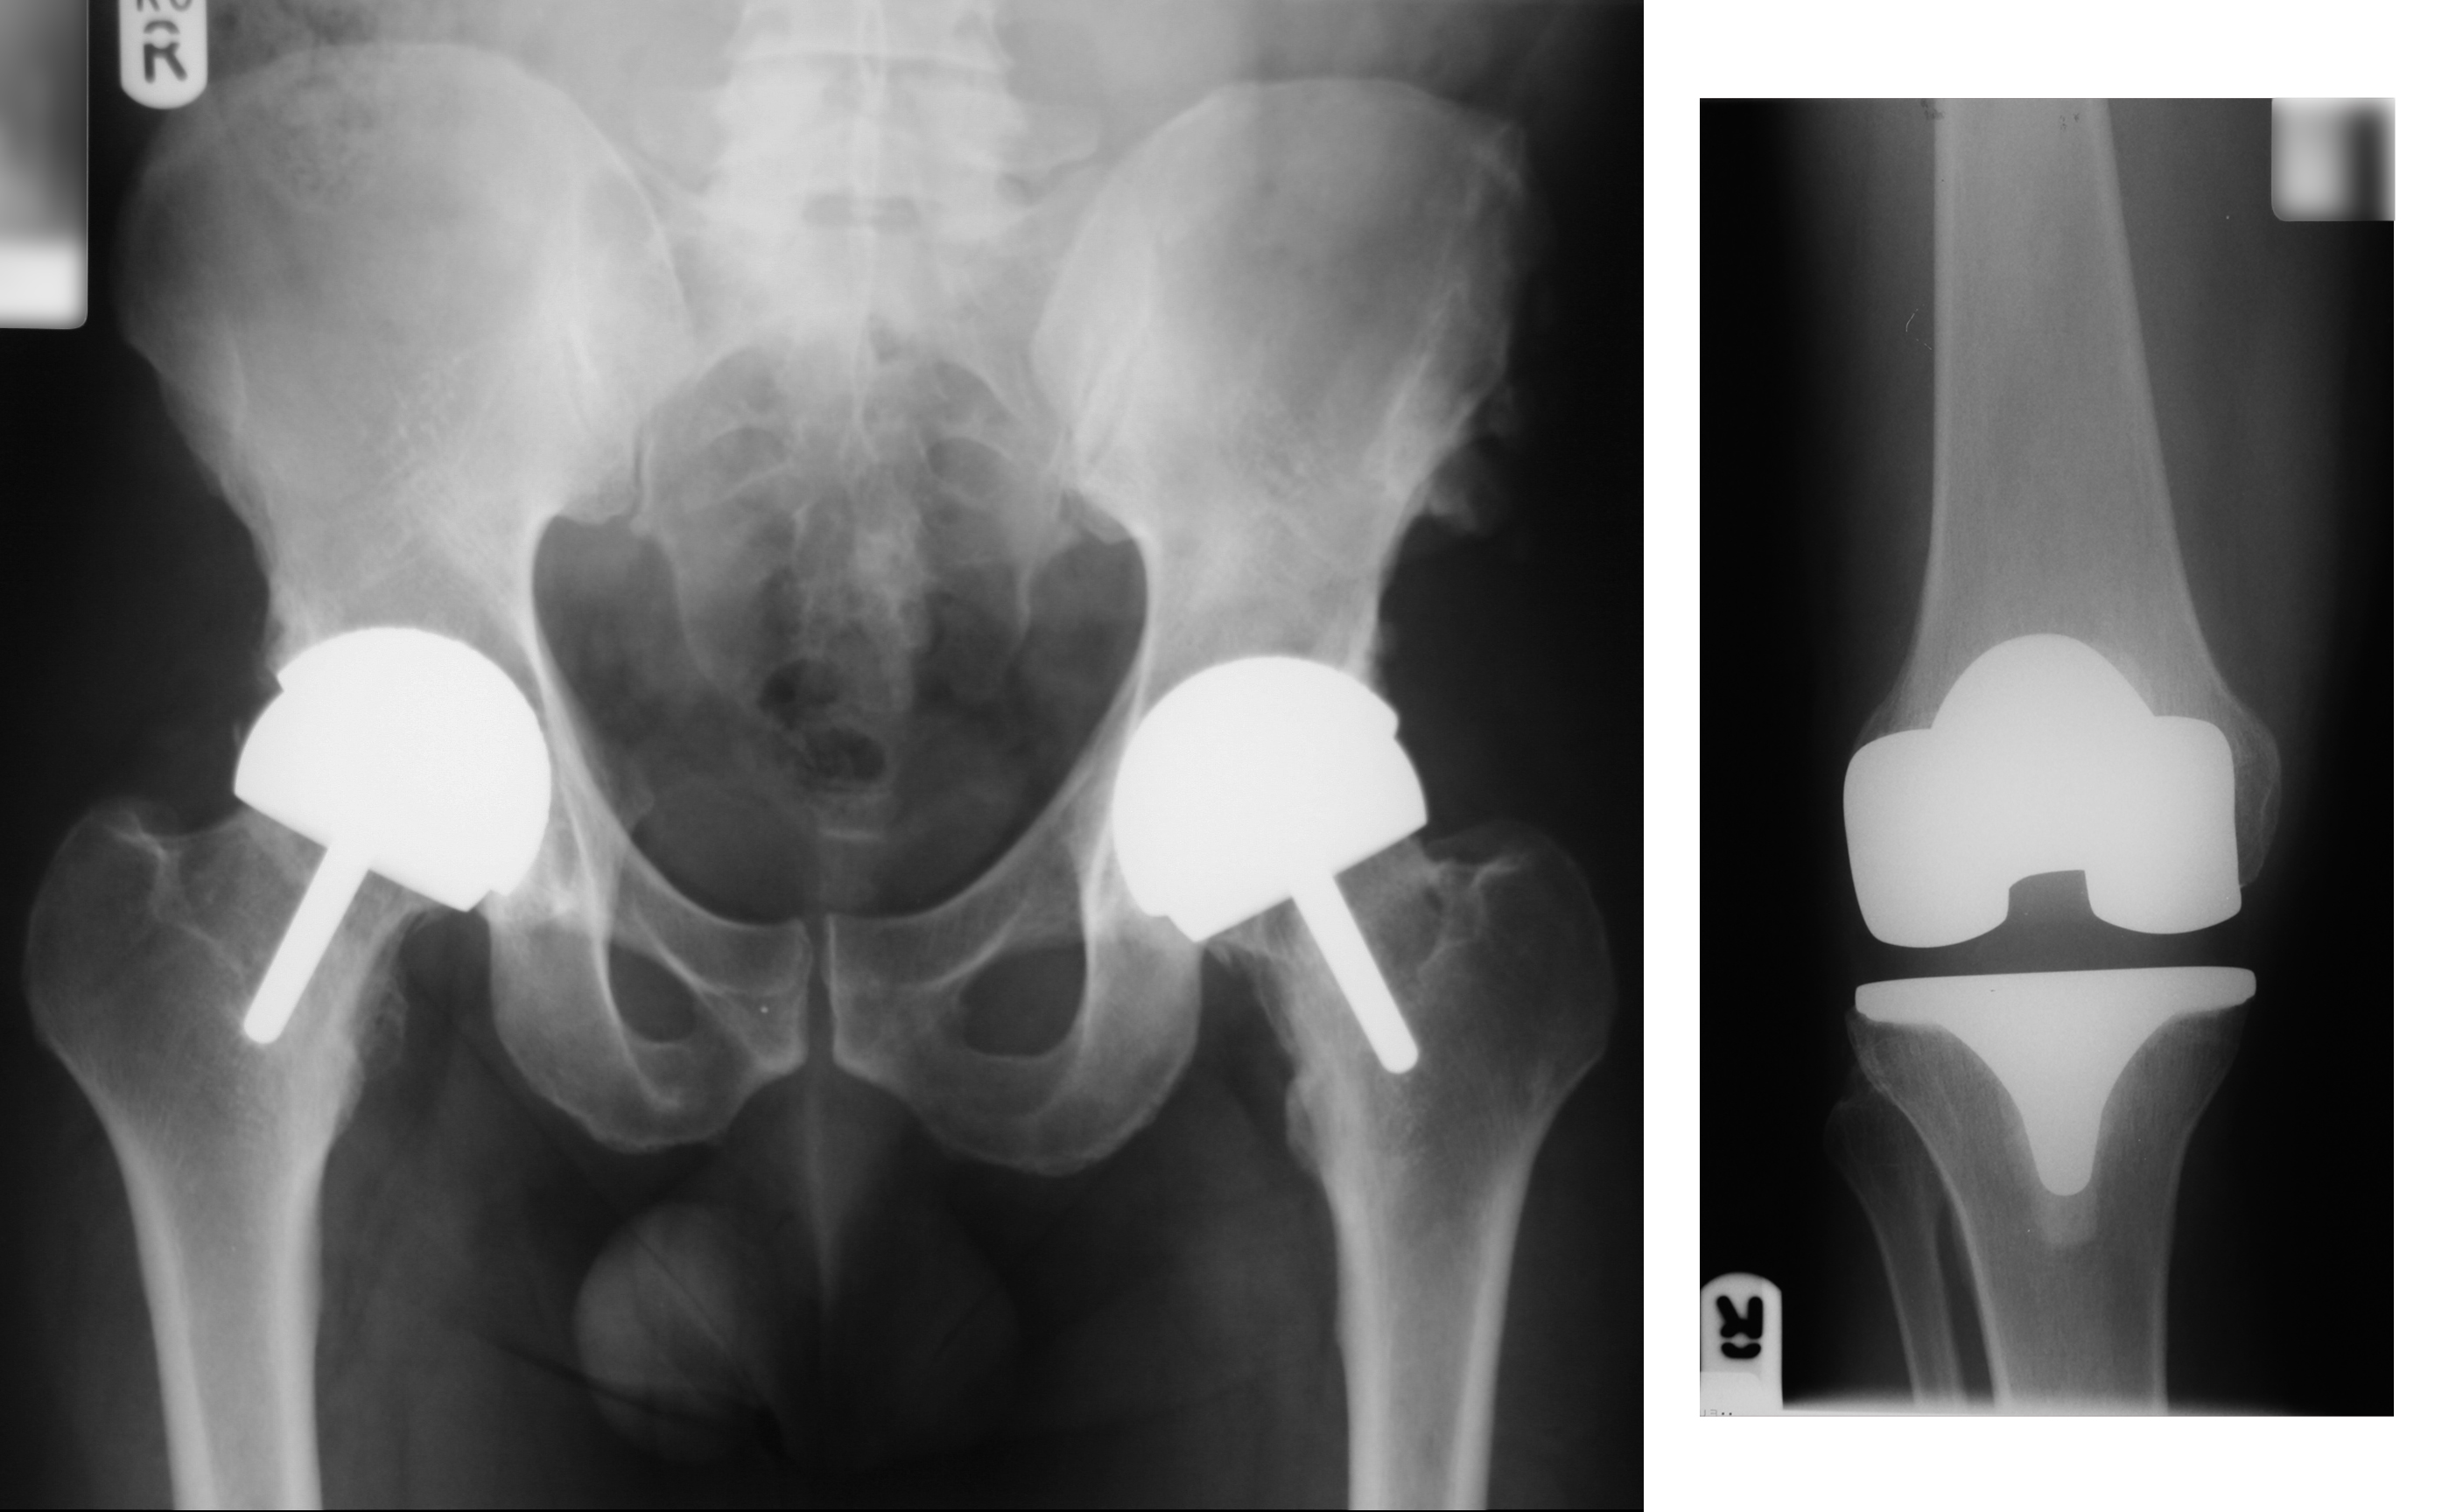 Wagner's Bilateral BHR x-ray (left) and BKR x-ray (right)